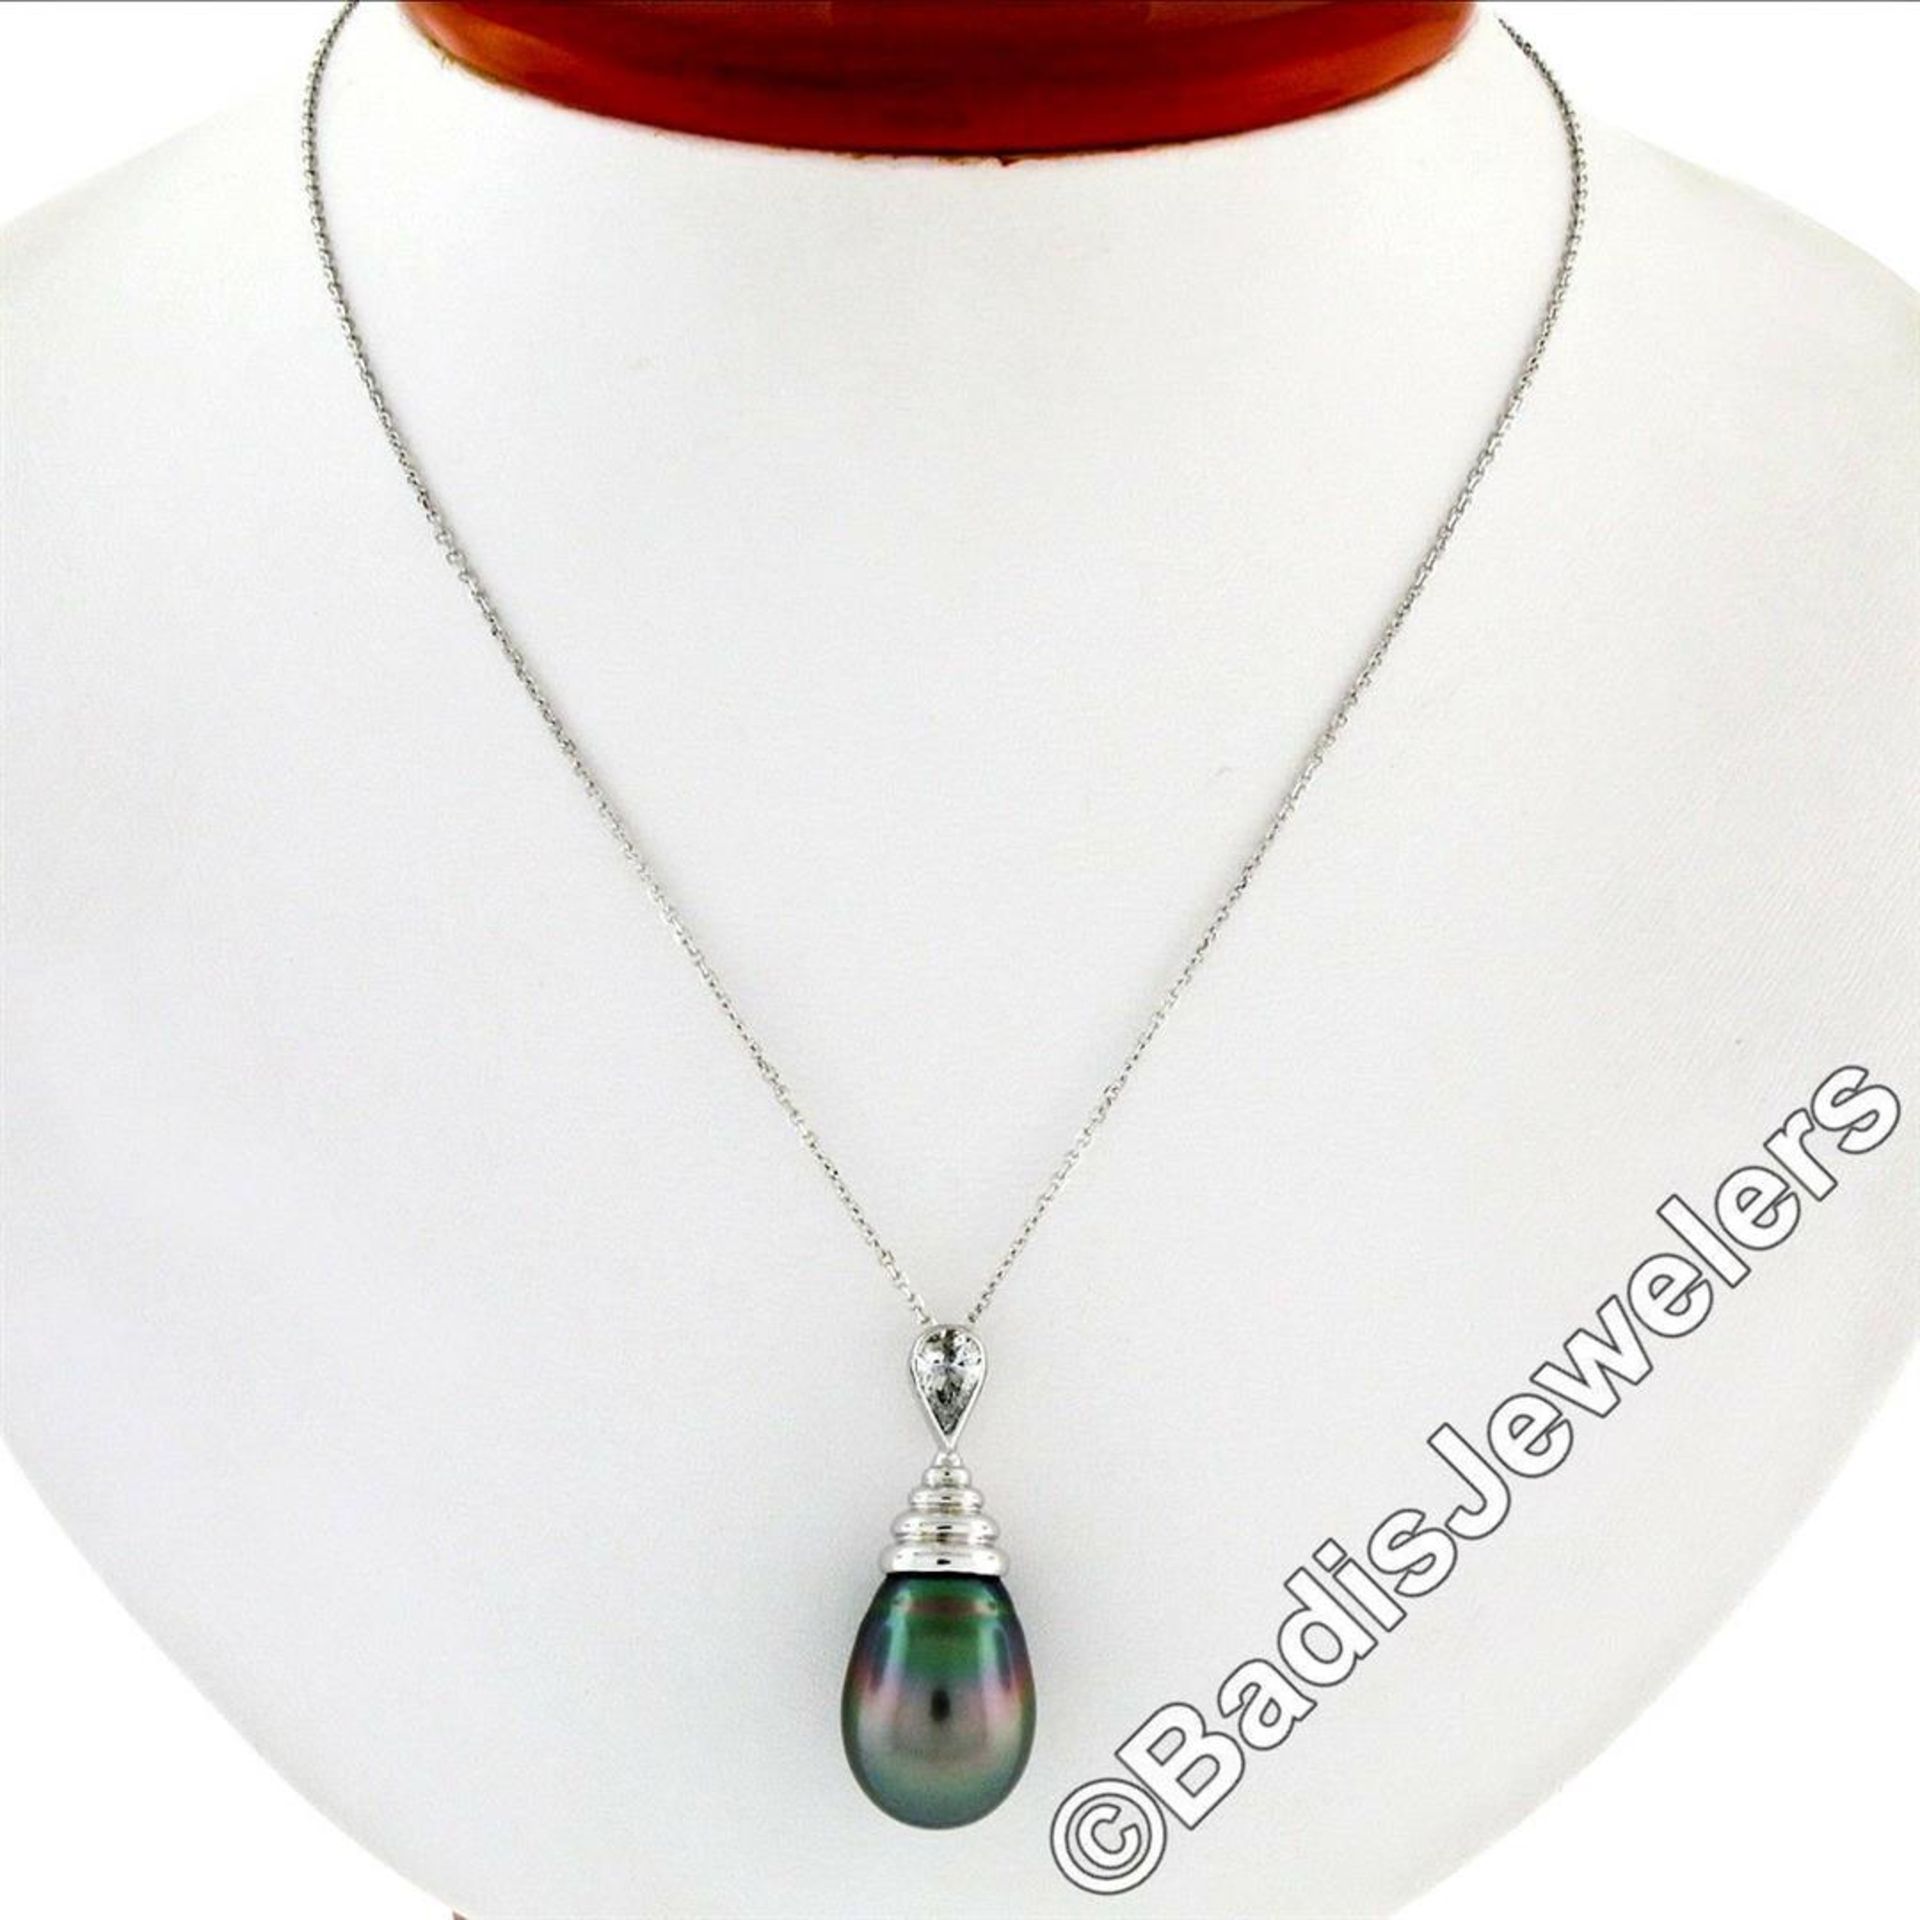 18kt White Gold Tahitian Black Pearl and 0.60 ct Diamond Pendant Necklace - Image 3 of 7